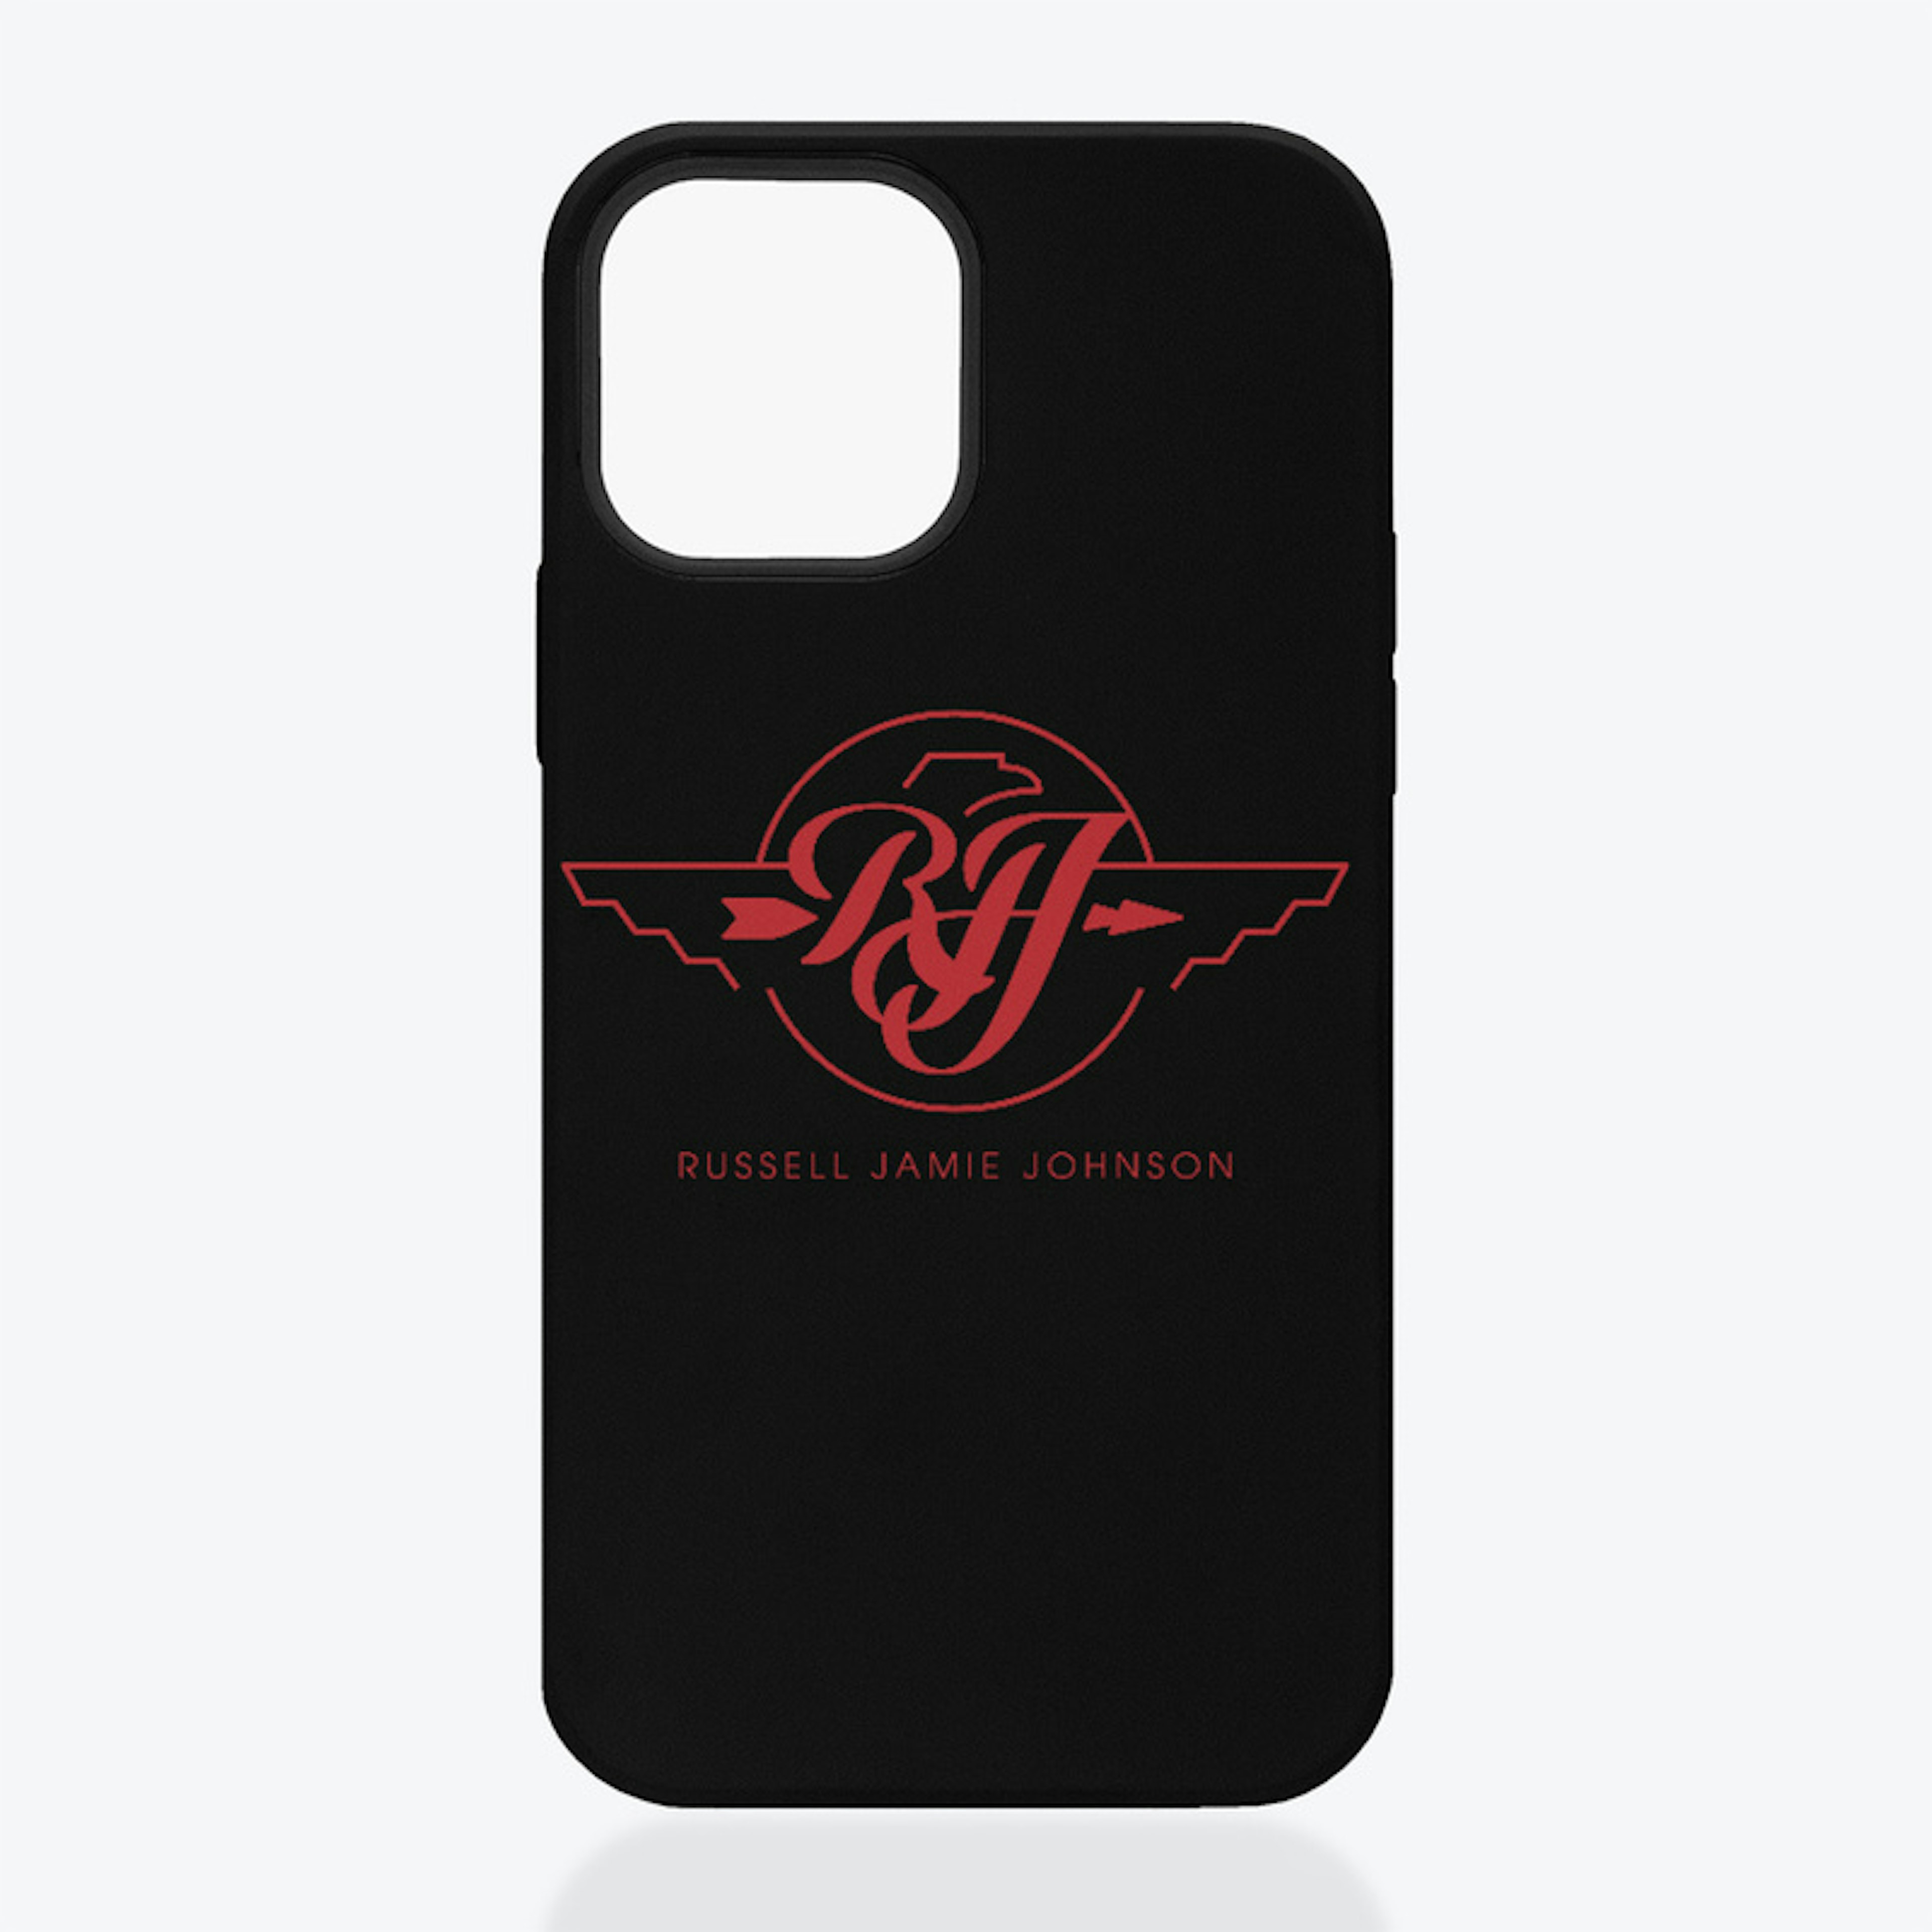 Blood Red Iphone Case 